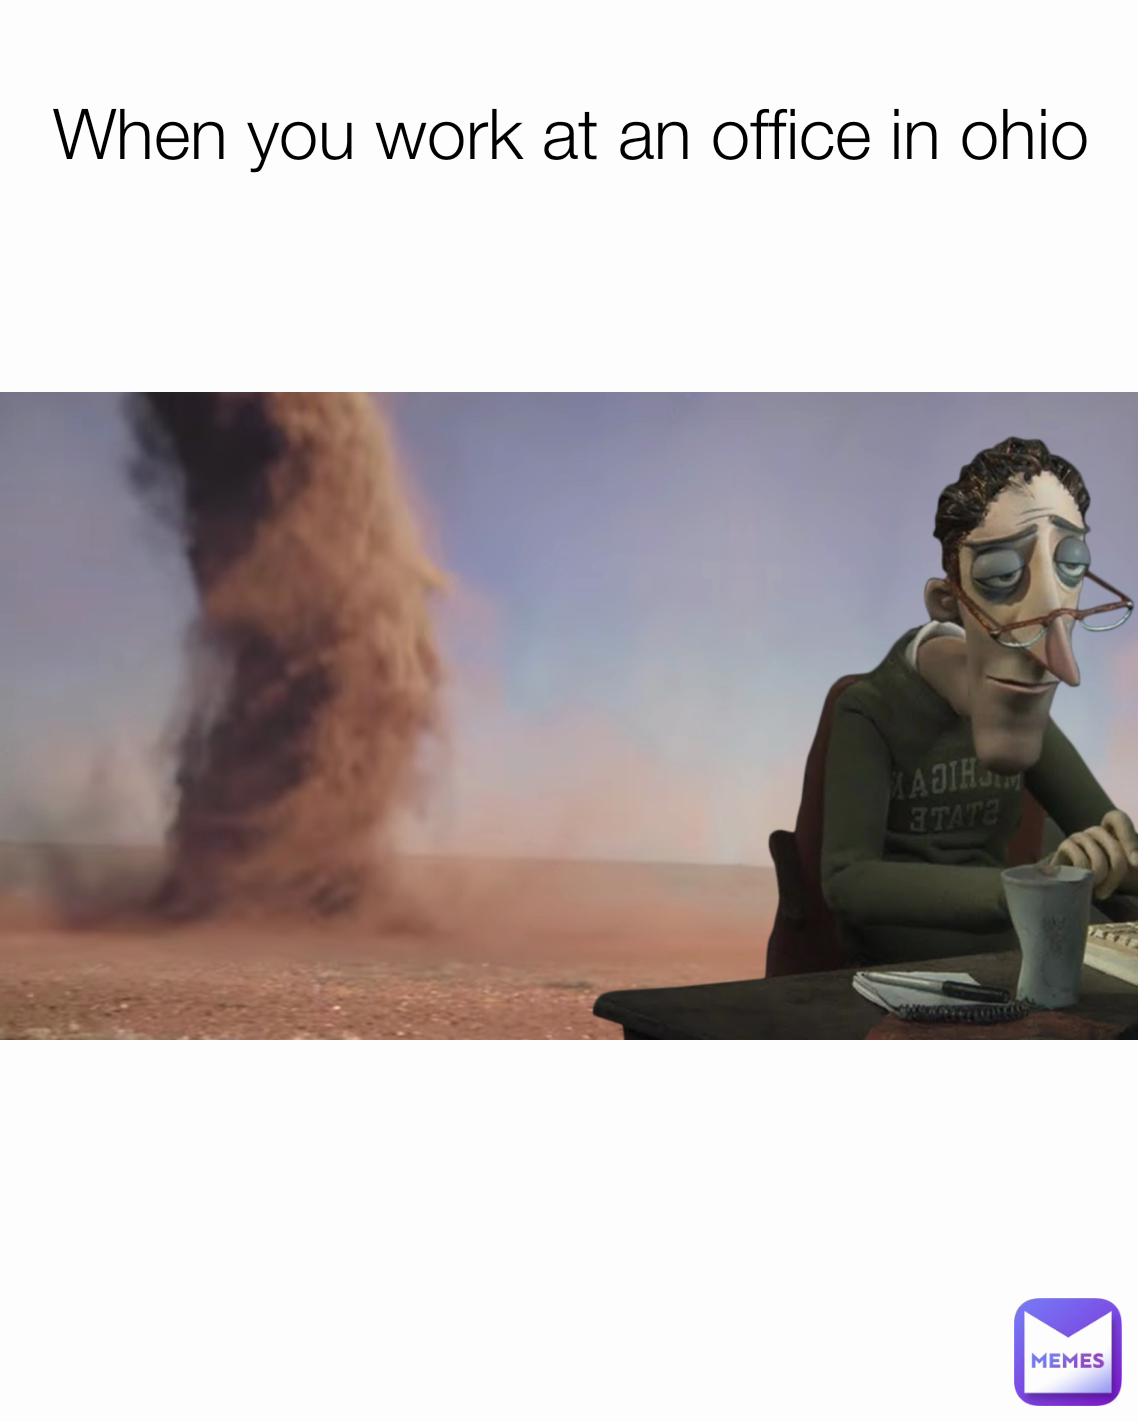 When you work at an office in ohio